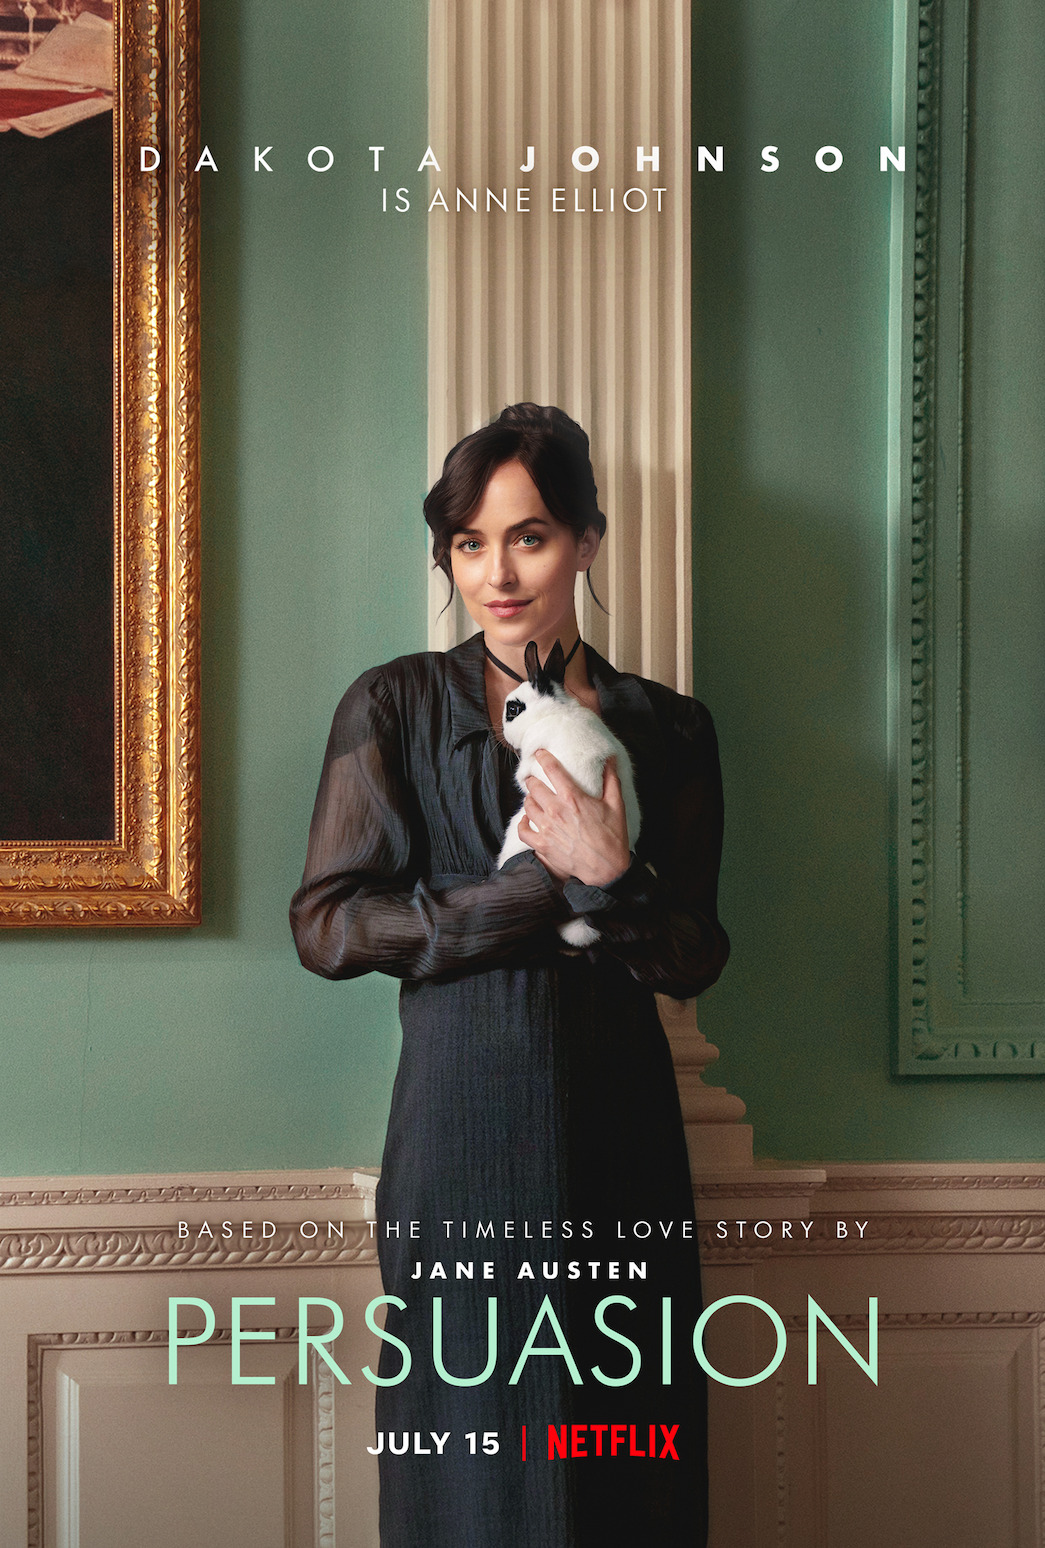 Check Out Dakota Johnson in New 'Persuasion' Character Poster